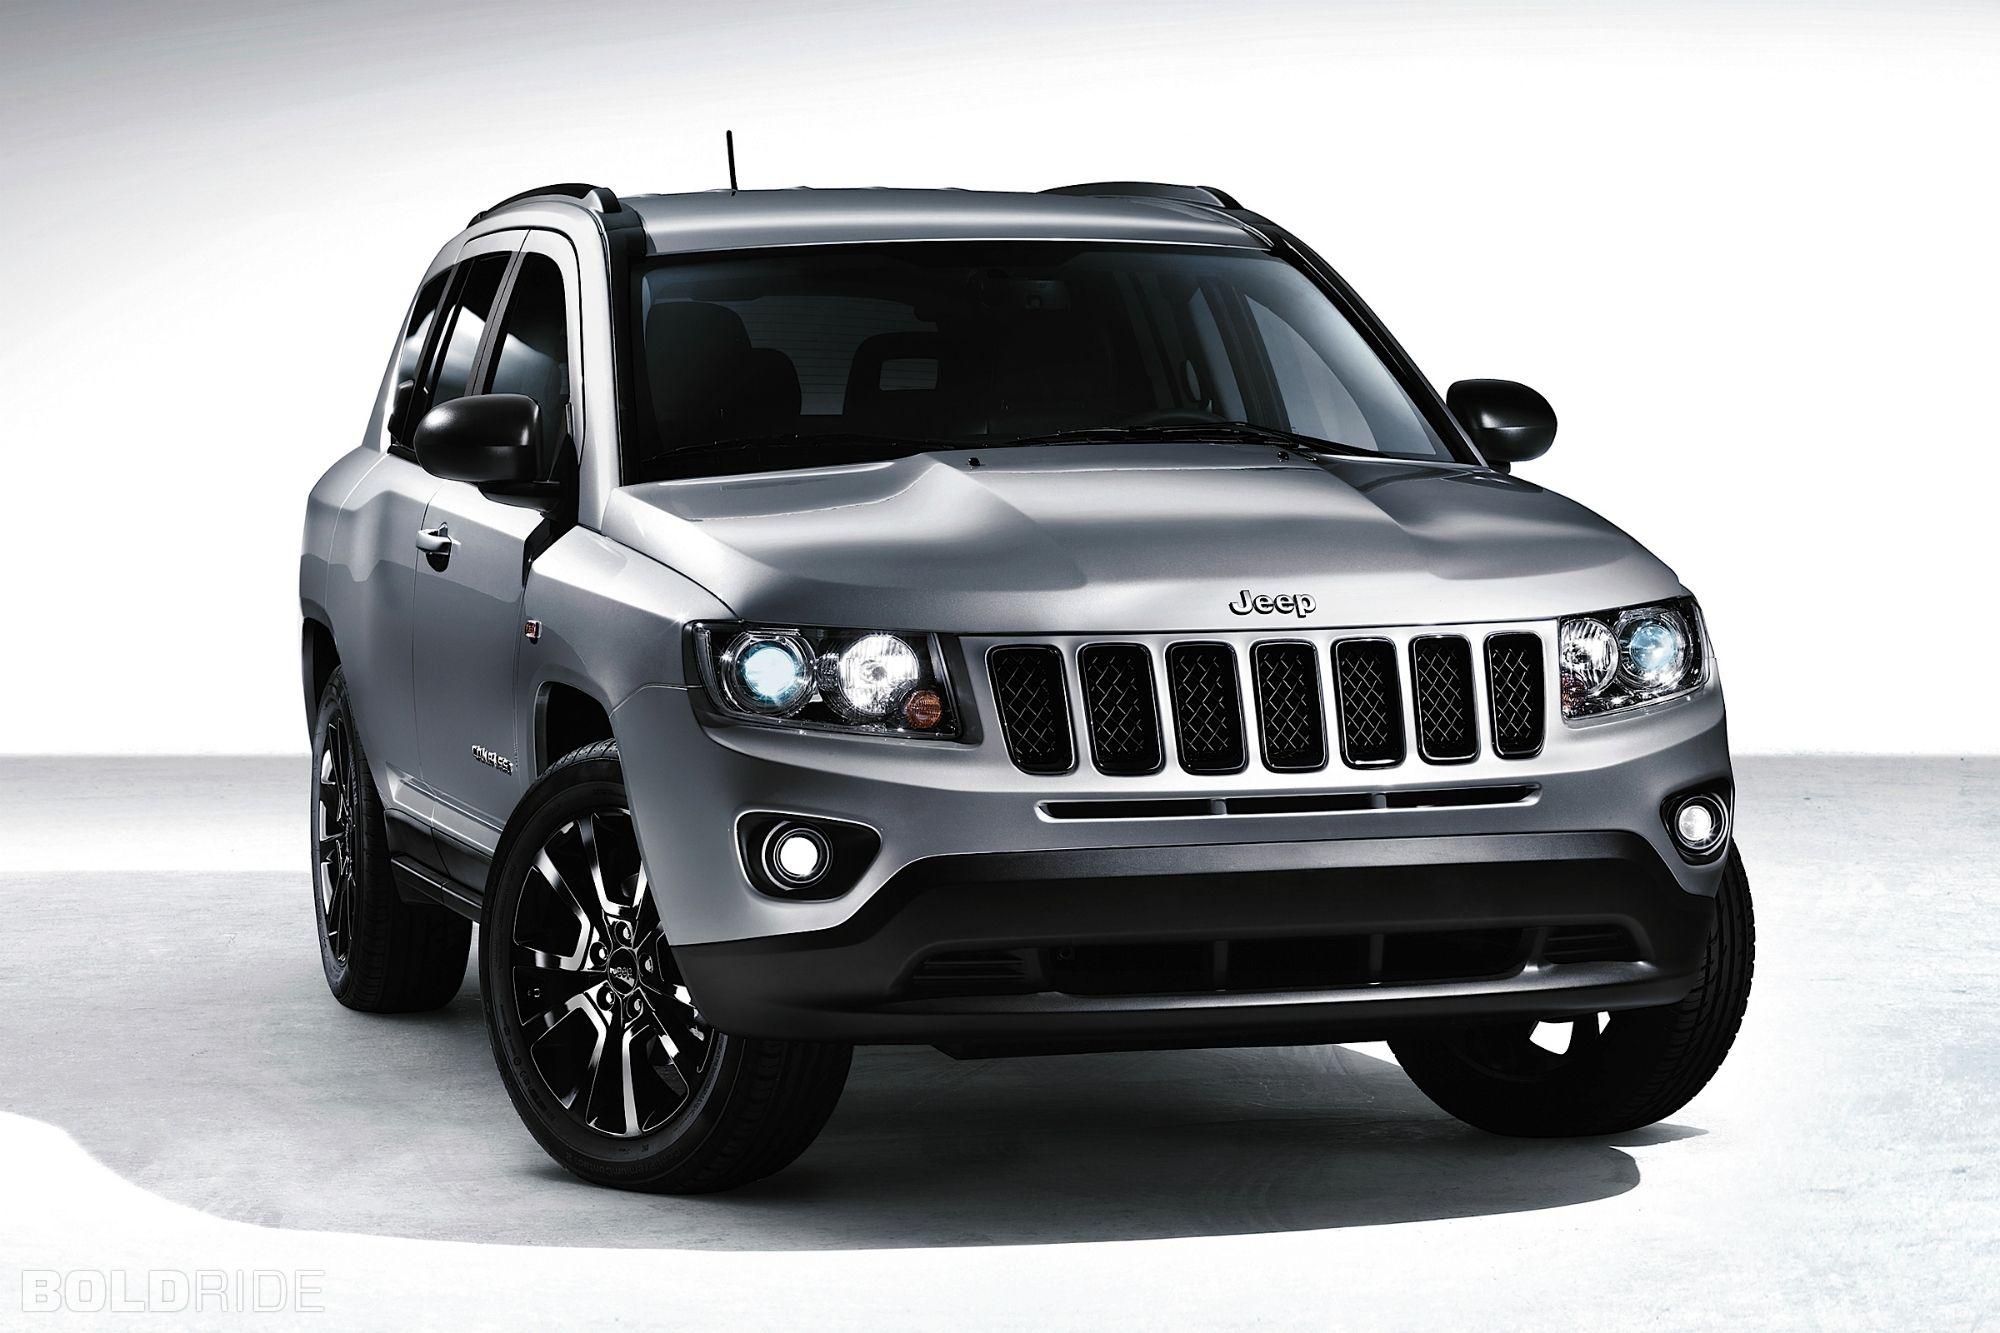 Grey Jeep Compass wallpaper and image, picture, photo